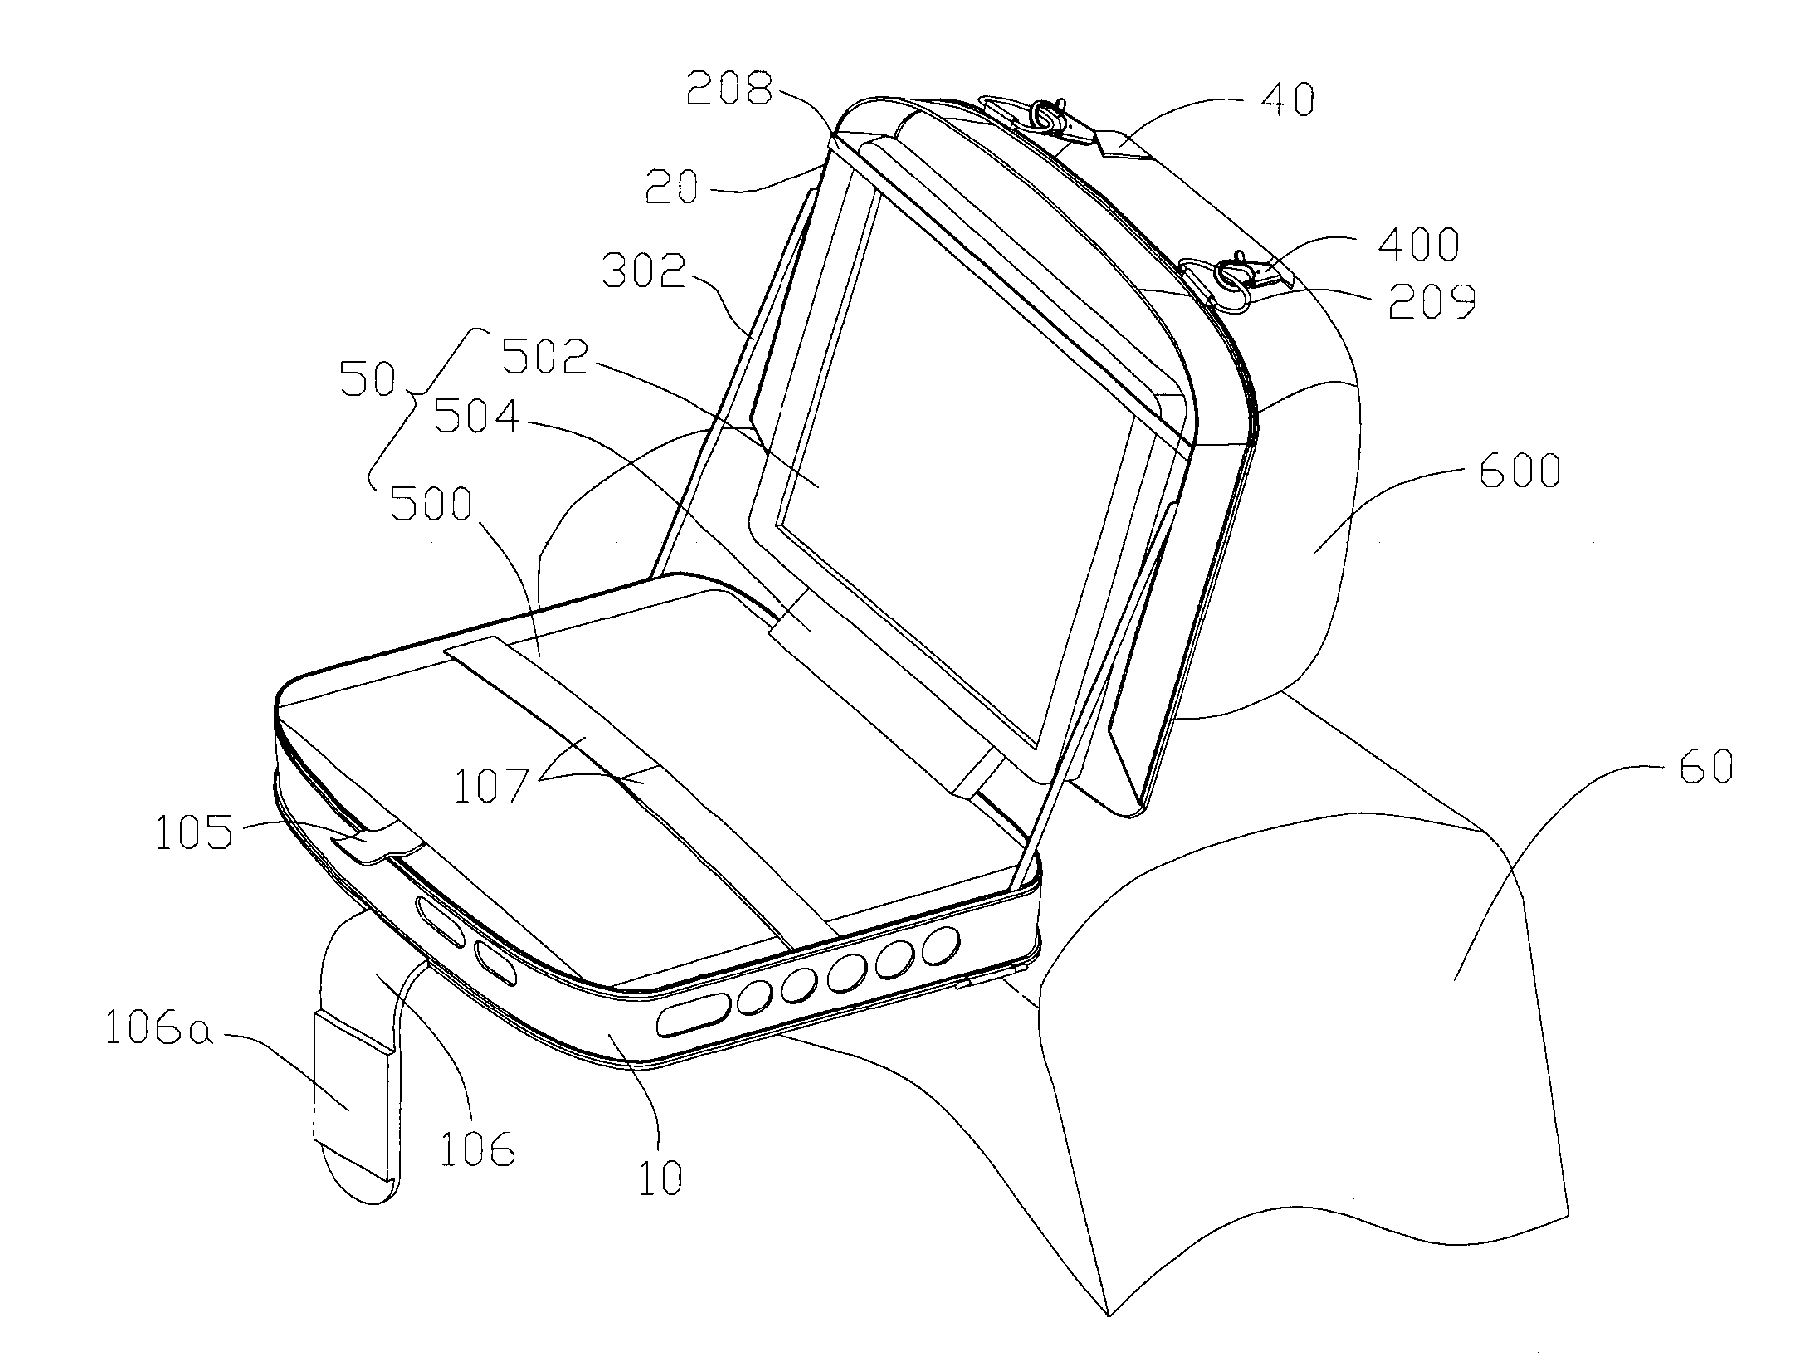 Carrying bag for suspending electronic entertainment apparatus